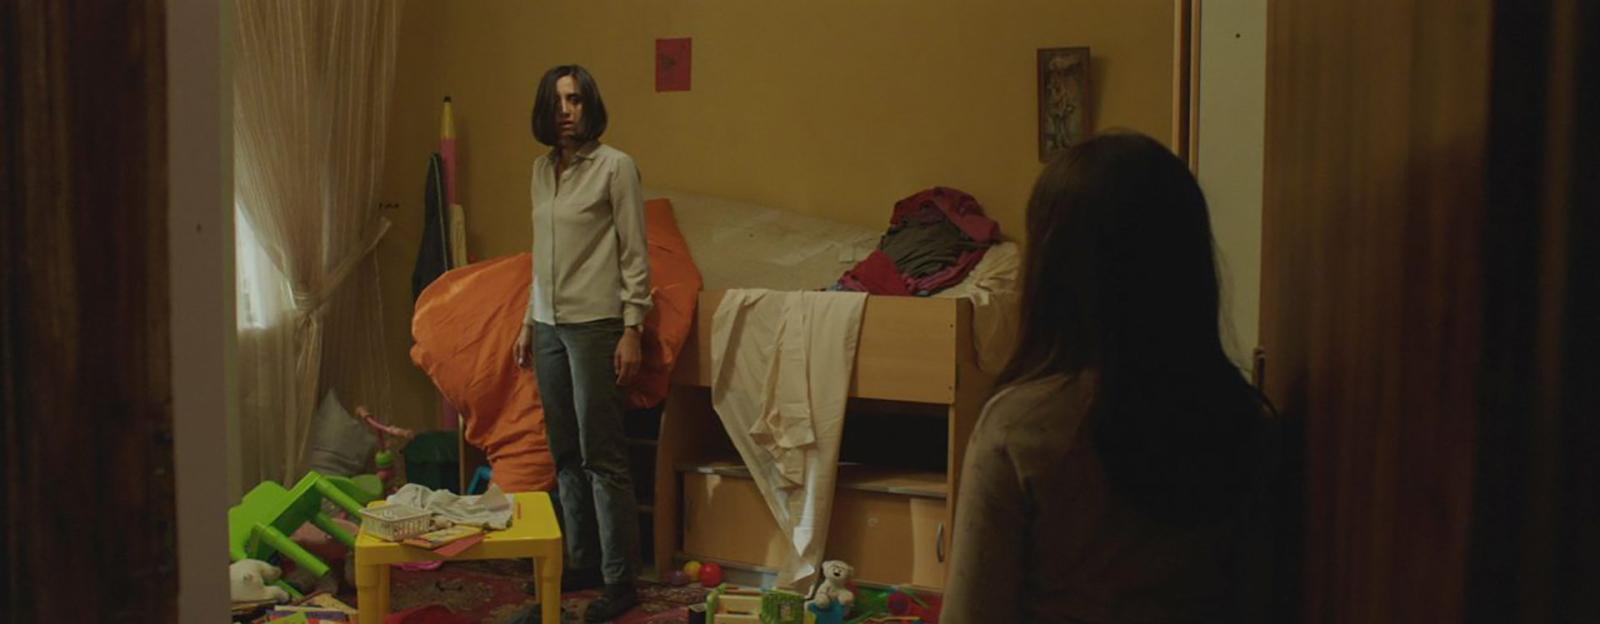 Under the Shadow - Il Diavolo nell'Ombra - Blu-ray (Blu-ray) Image 3